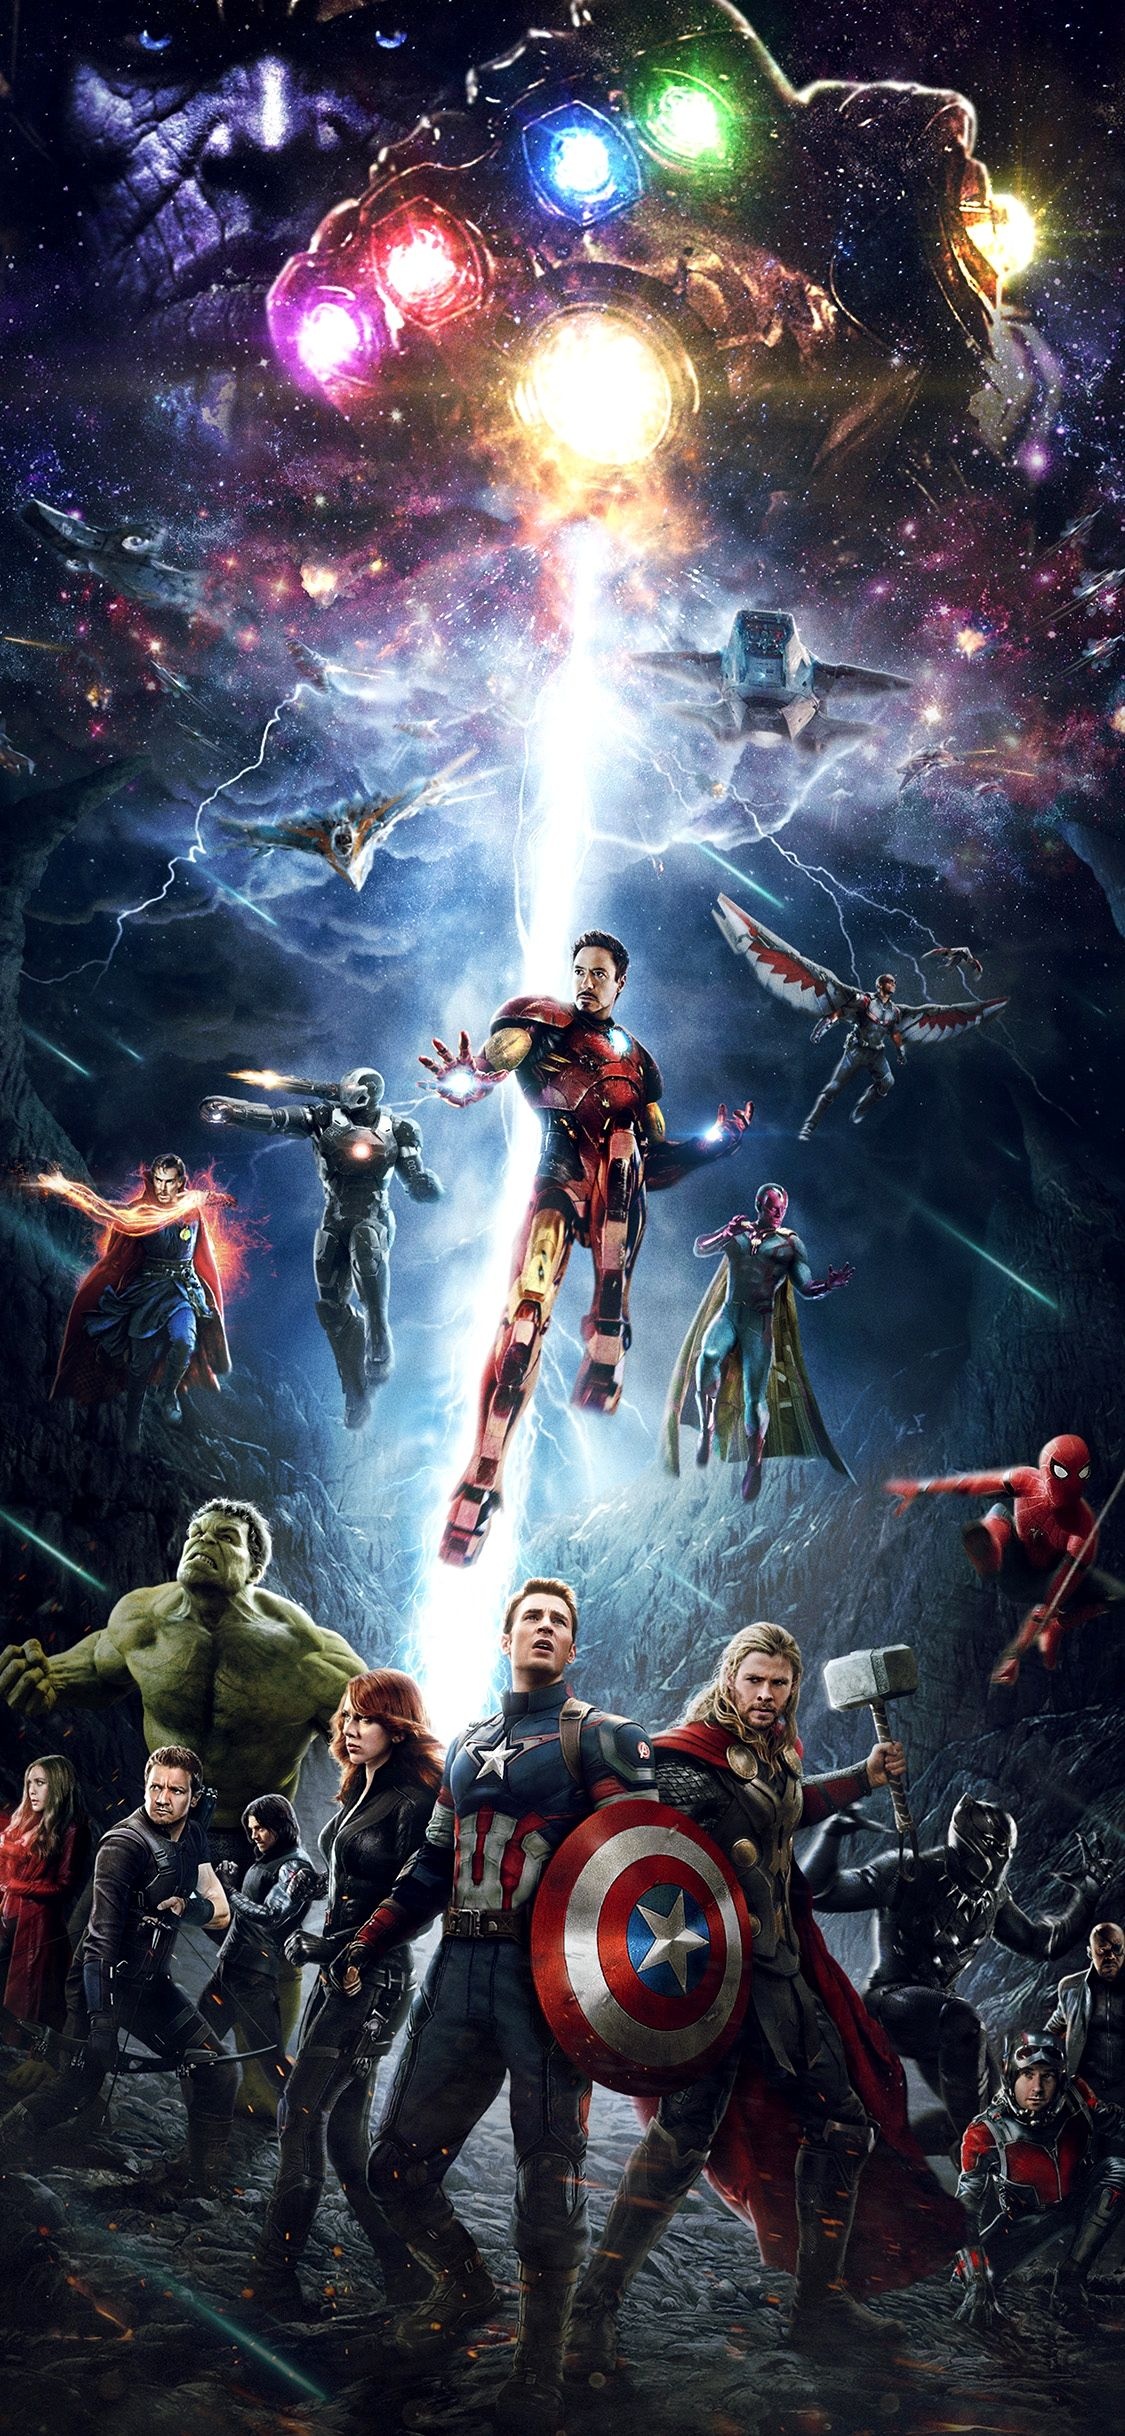 MCU (Comics), Ultra 4k iPhone wallpaper, Marvel background images, Stunning iPhone wallpapers, 1130x2440 HD Phone